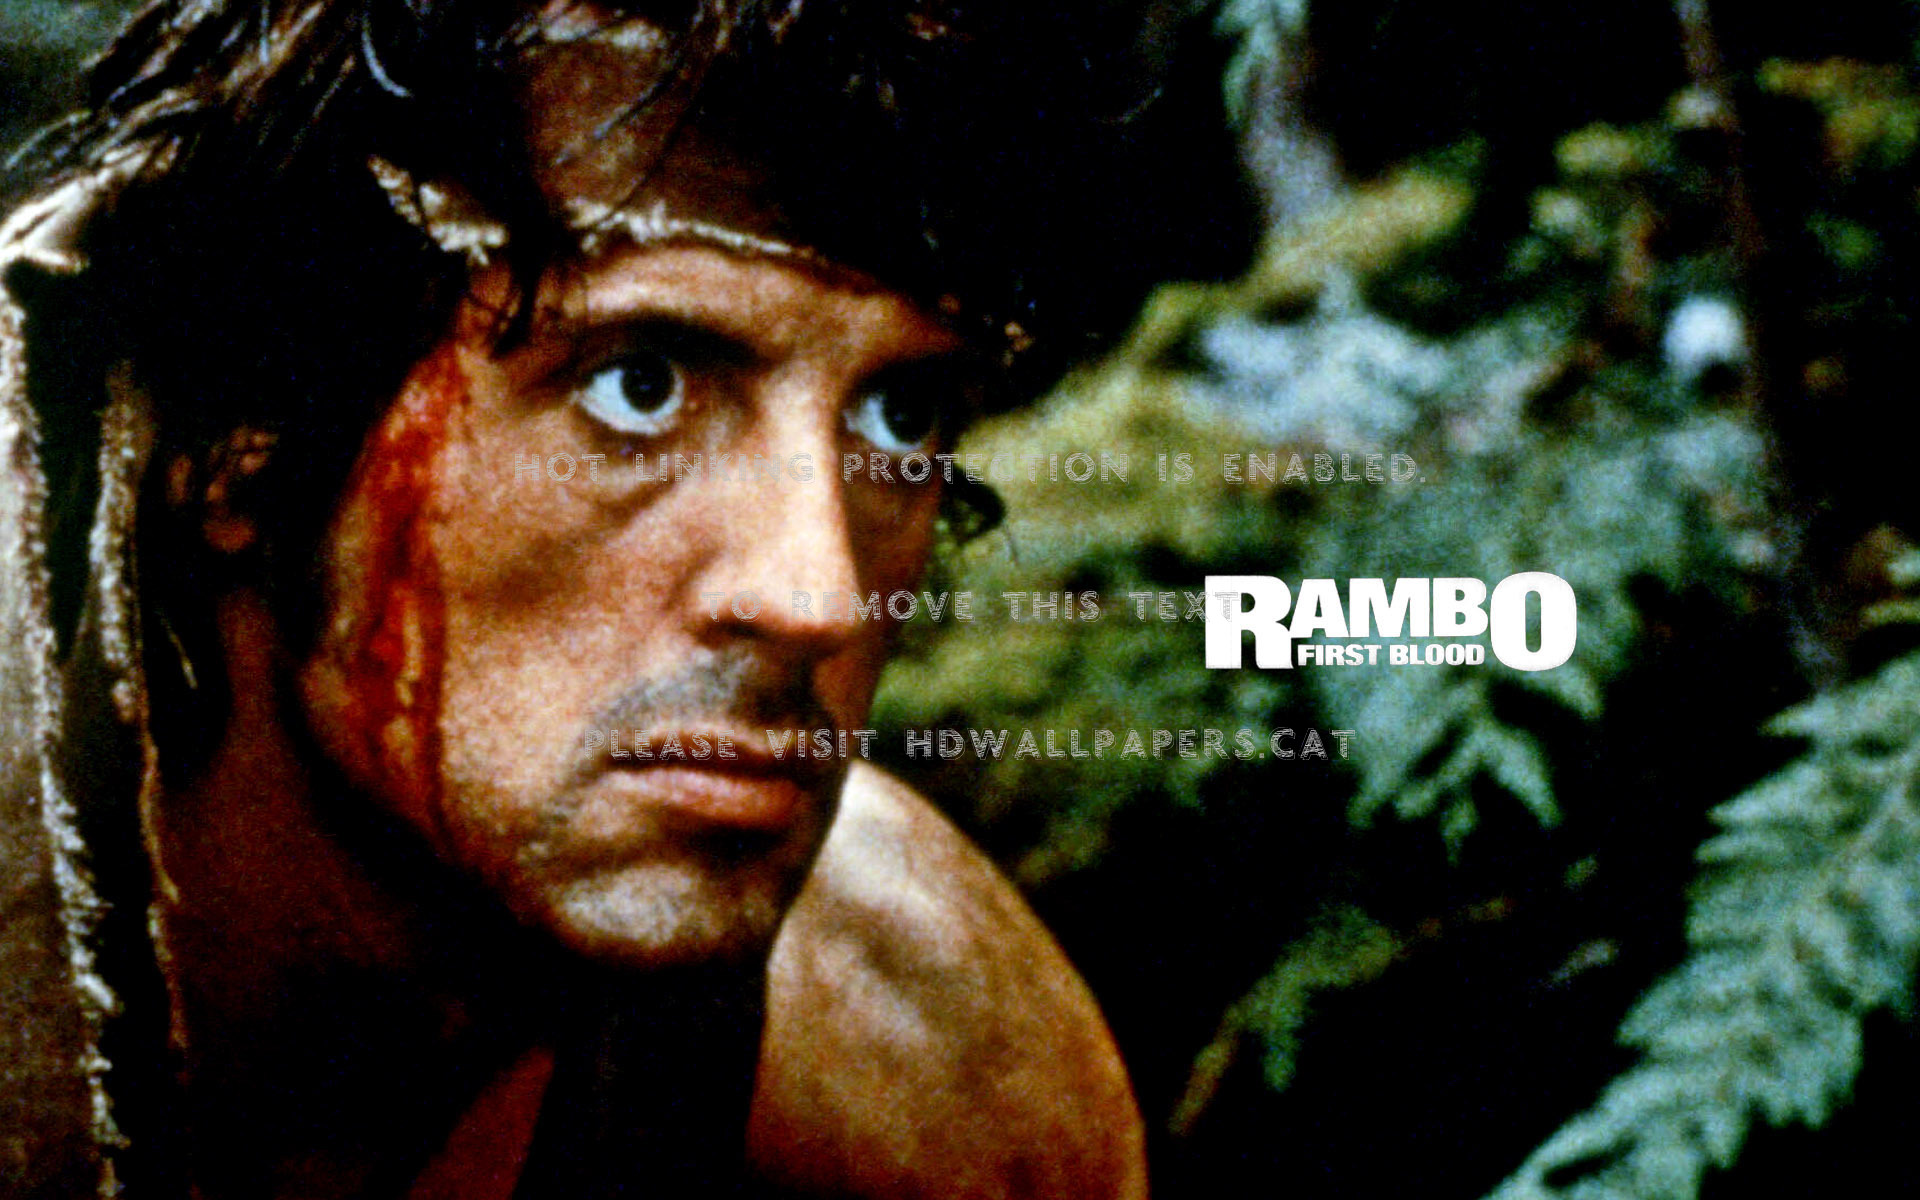 First Blood Rambo Movie Entertainment - First Blood - HD Wallpaper 